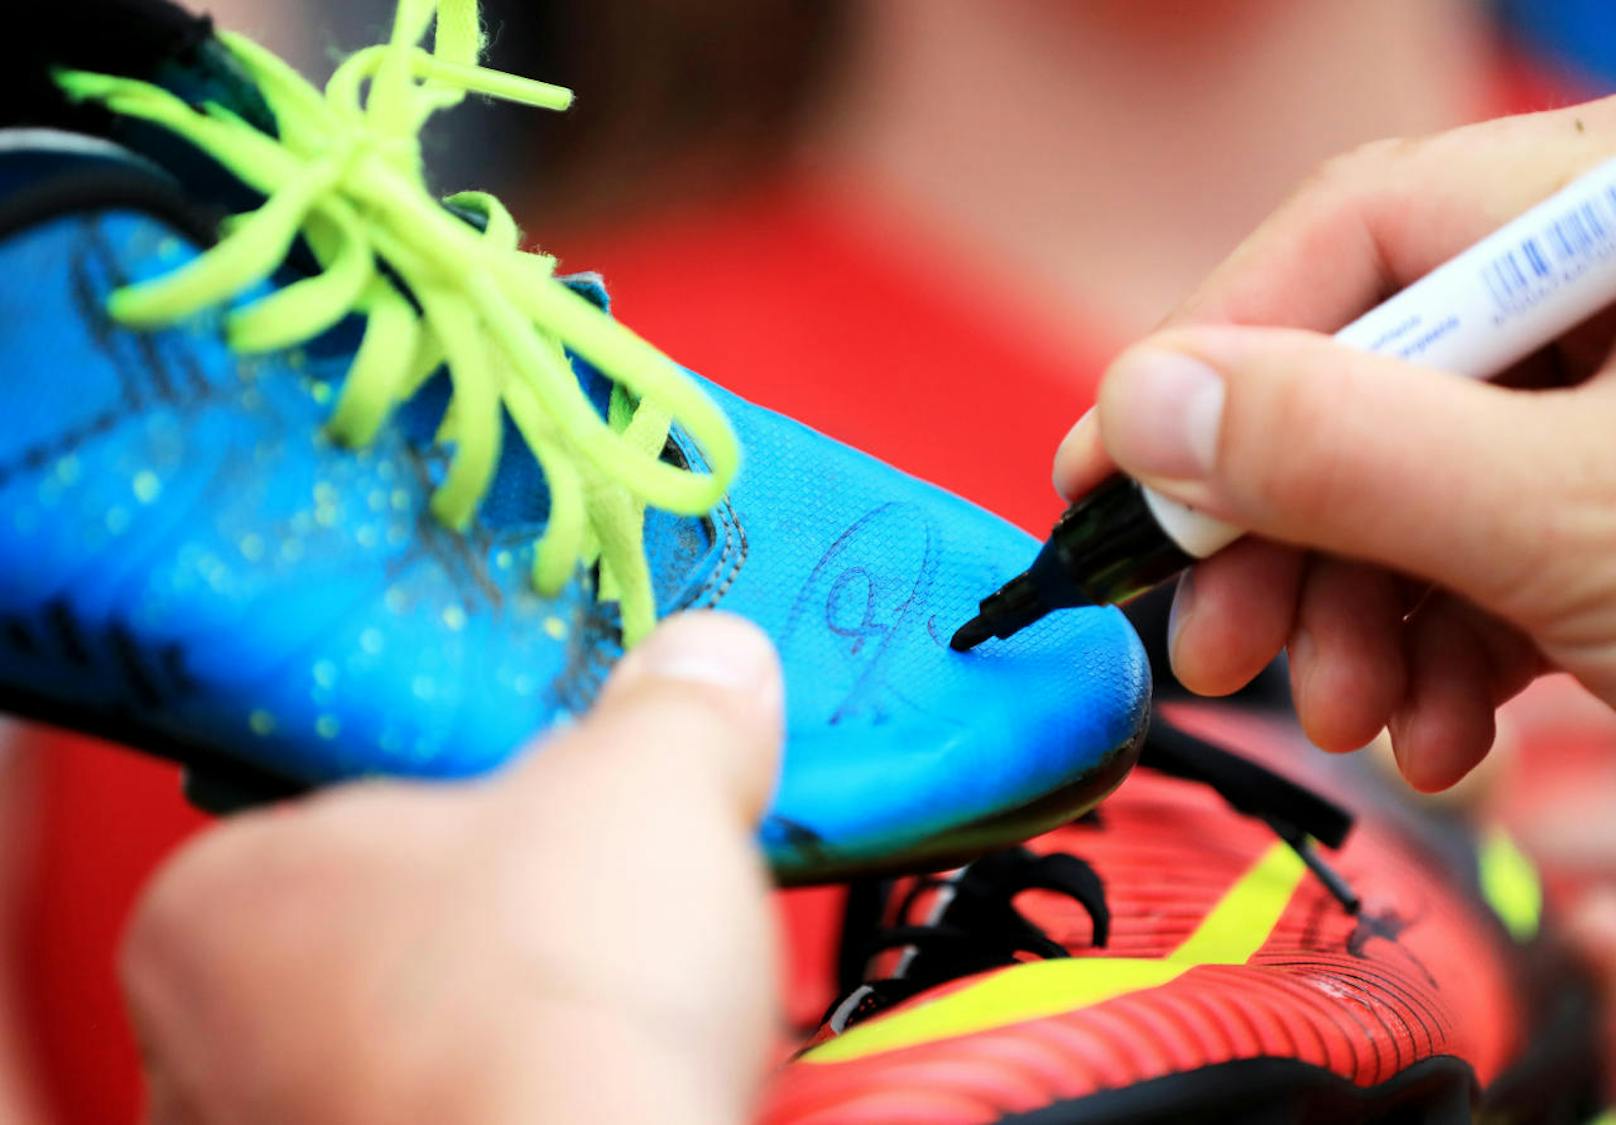 STEGERSBACH,AUSTRIA,31.MAY.17 - SOCCER - FIFA World Cup 2018, european qualifiers, OEFB international match, Ireland vs Austria, preview, training team AUT. Image shows a feature with a football shoe. Photo: GEPA pictures/ Mario Buehner